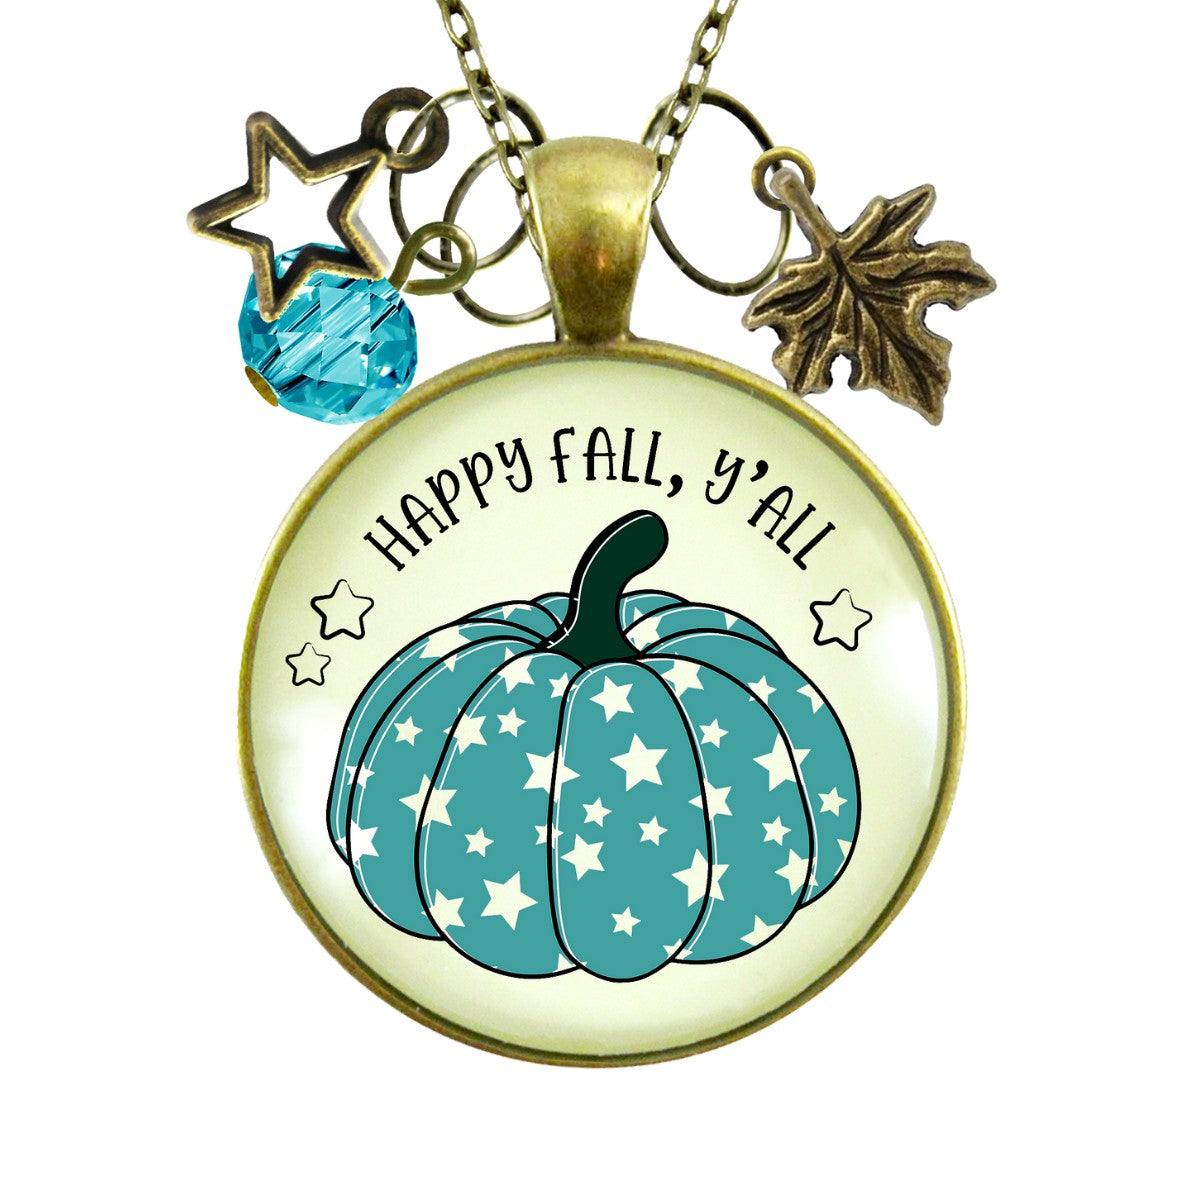 Happy Fall Y'All Necklace Teal Pumpkin Stars Autumn Fashion Costume Jewelry Message Card  Necklace - Gutsy Goodness Handmade Jewelry